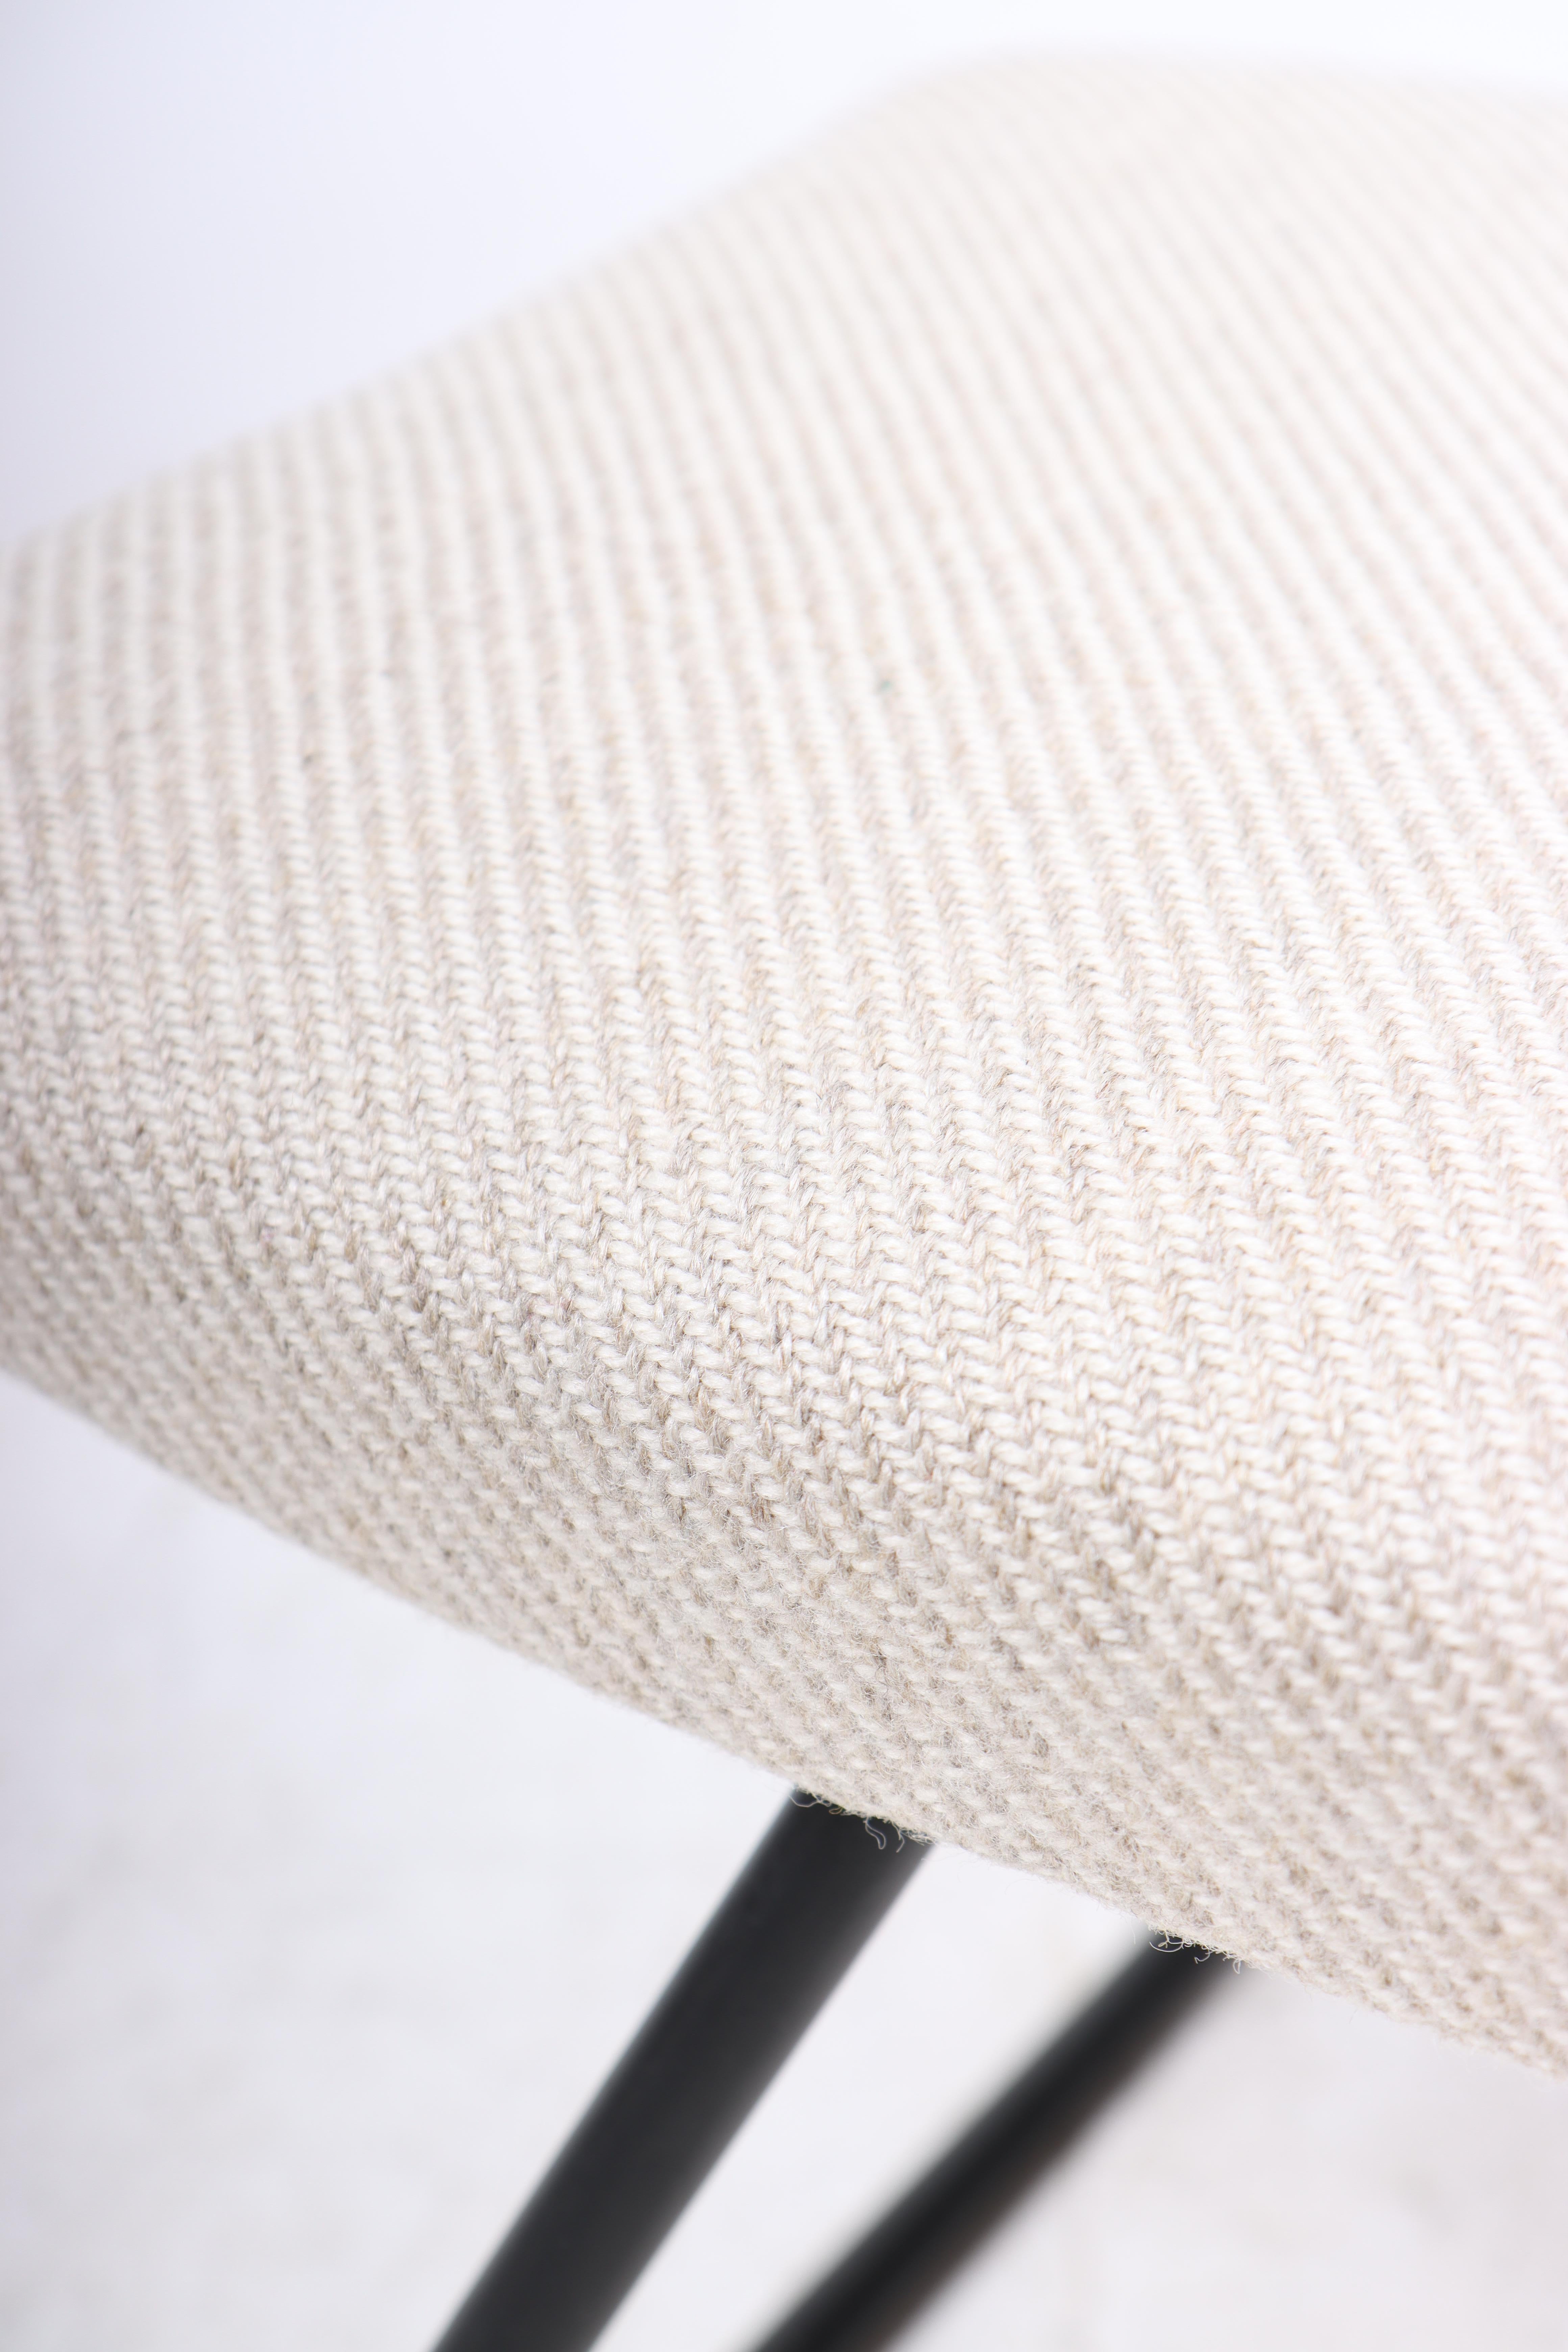 Mid-20th Century Midcentury Stool with Fabric, Made in Denmark 1960s For Sale